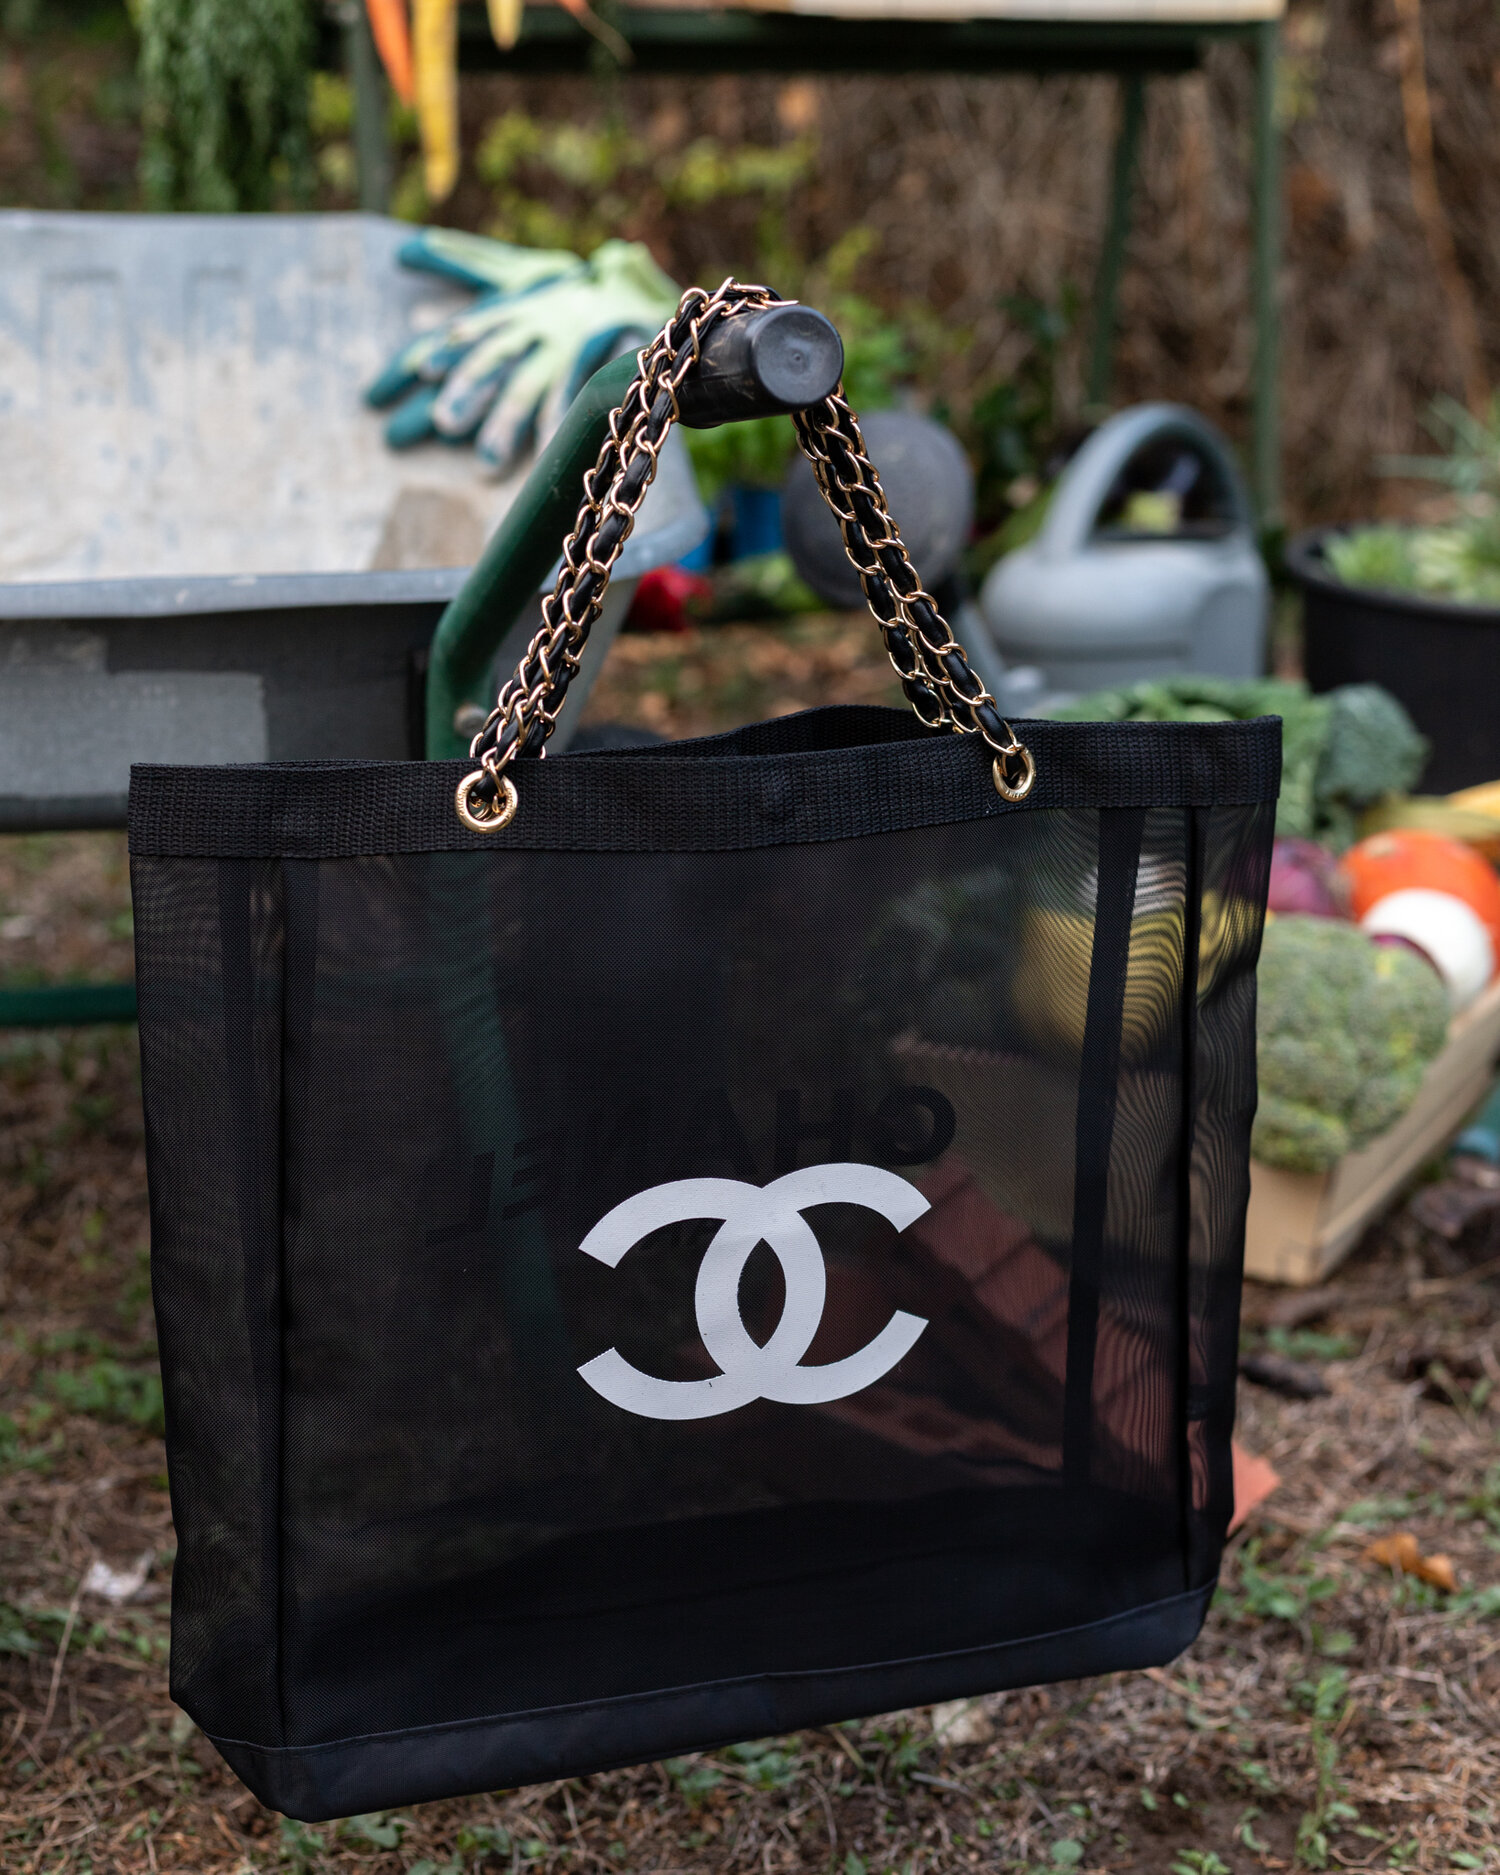 chanel inspired tote bag